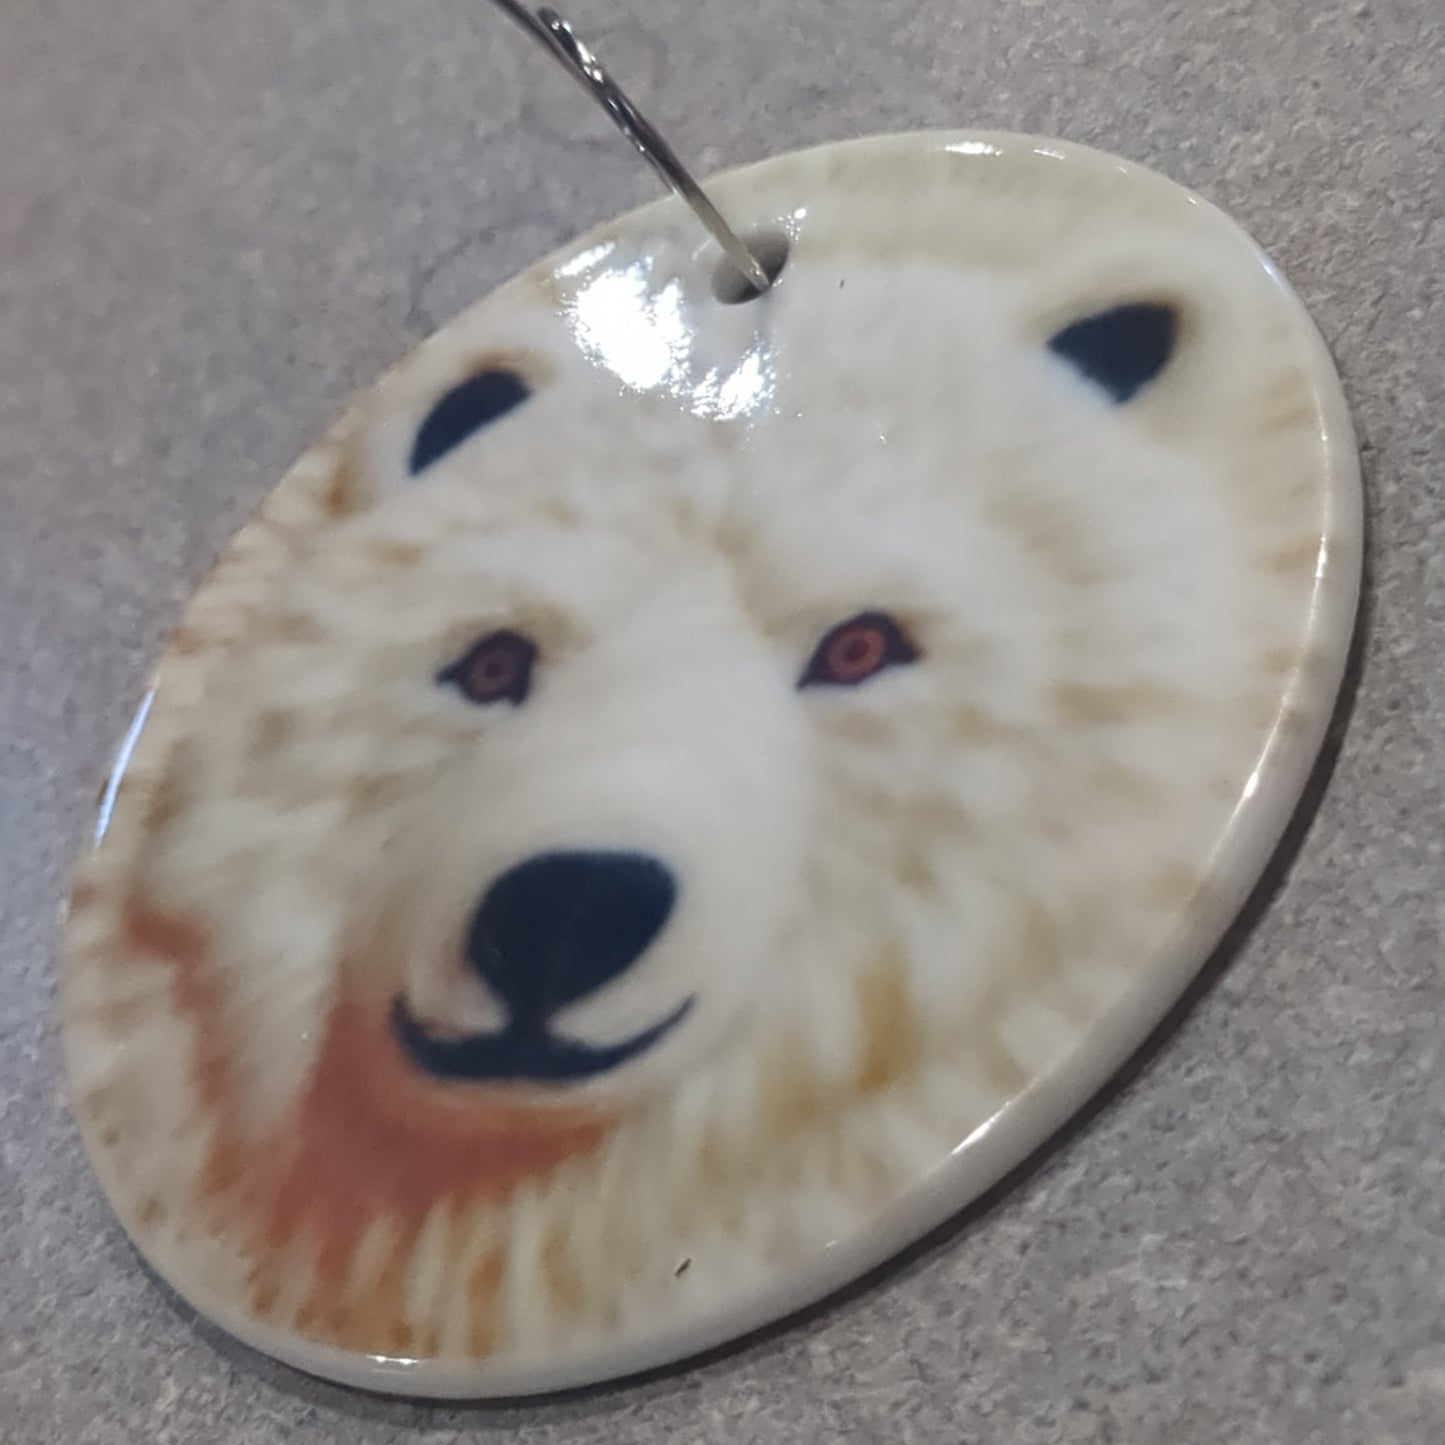 Ceramic ornament with polar bear face appears 3D but it is not